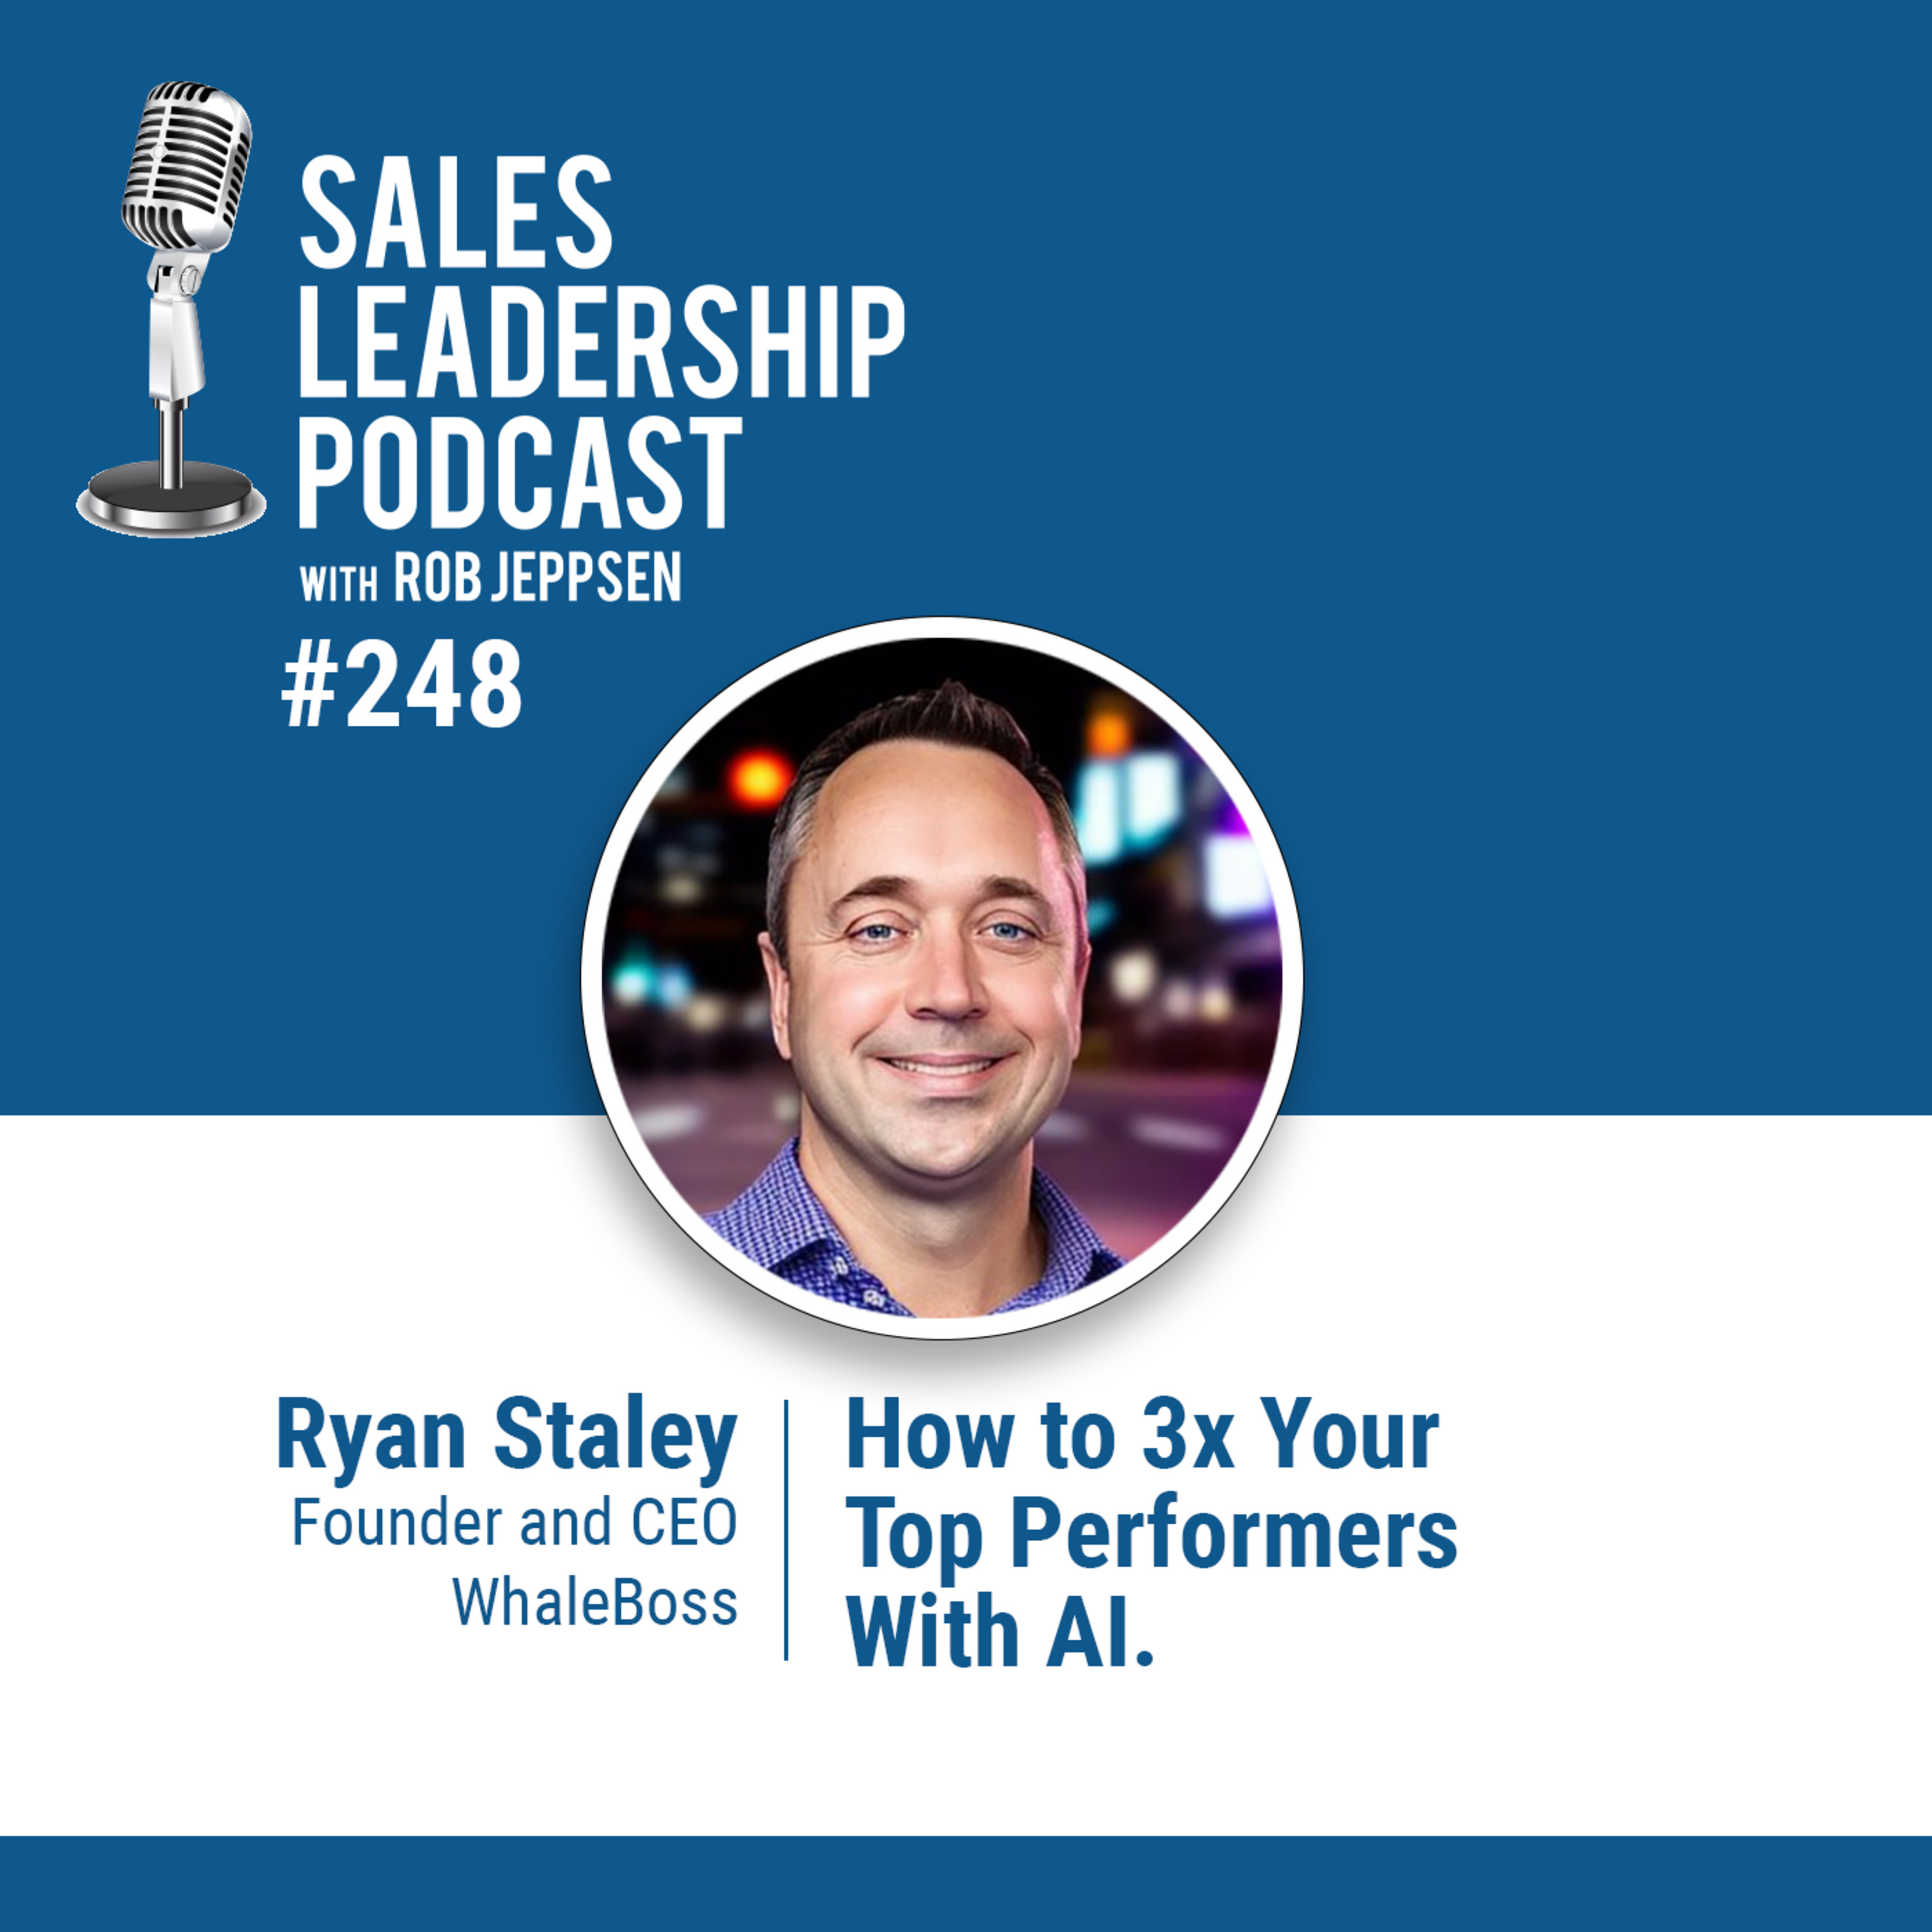 Episode 248: Ryan Staley, Founder and CEO of WhaleBoss: How to 3x Your Top Performers With AI.